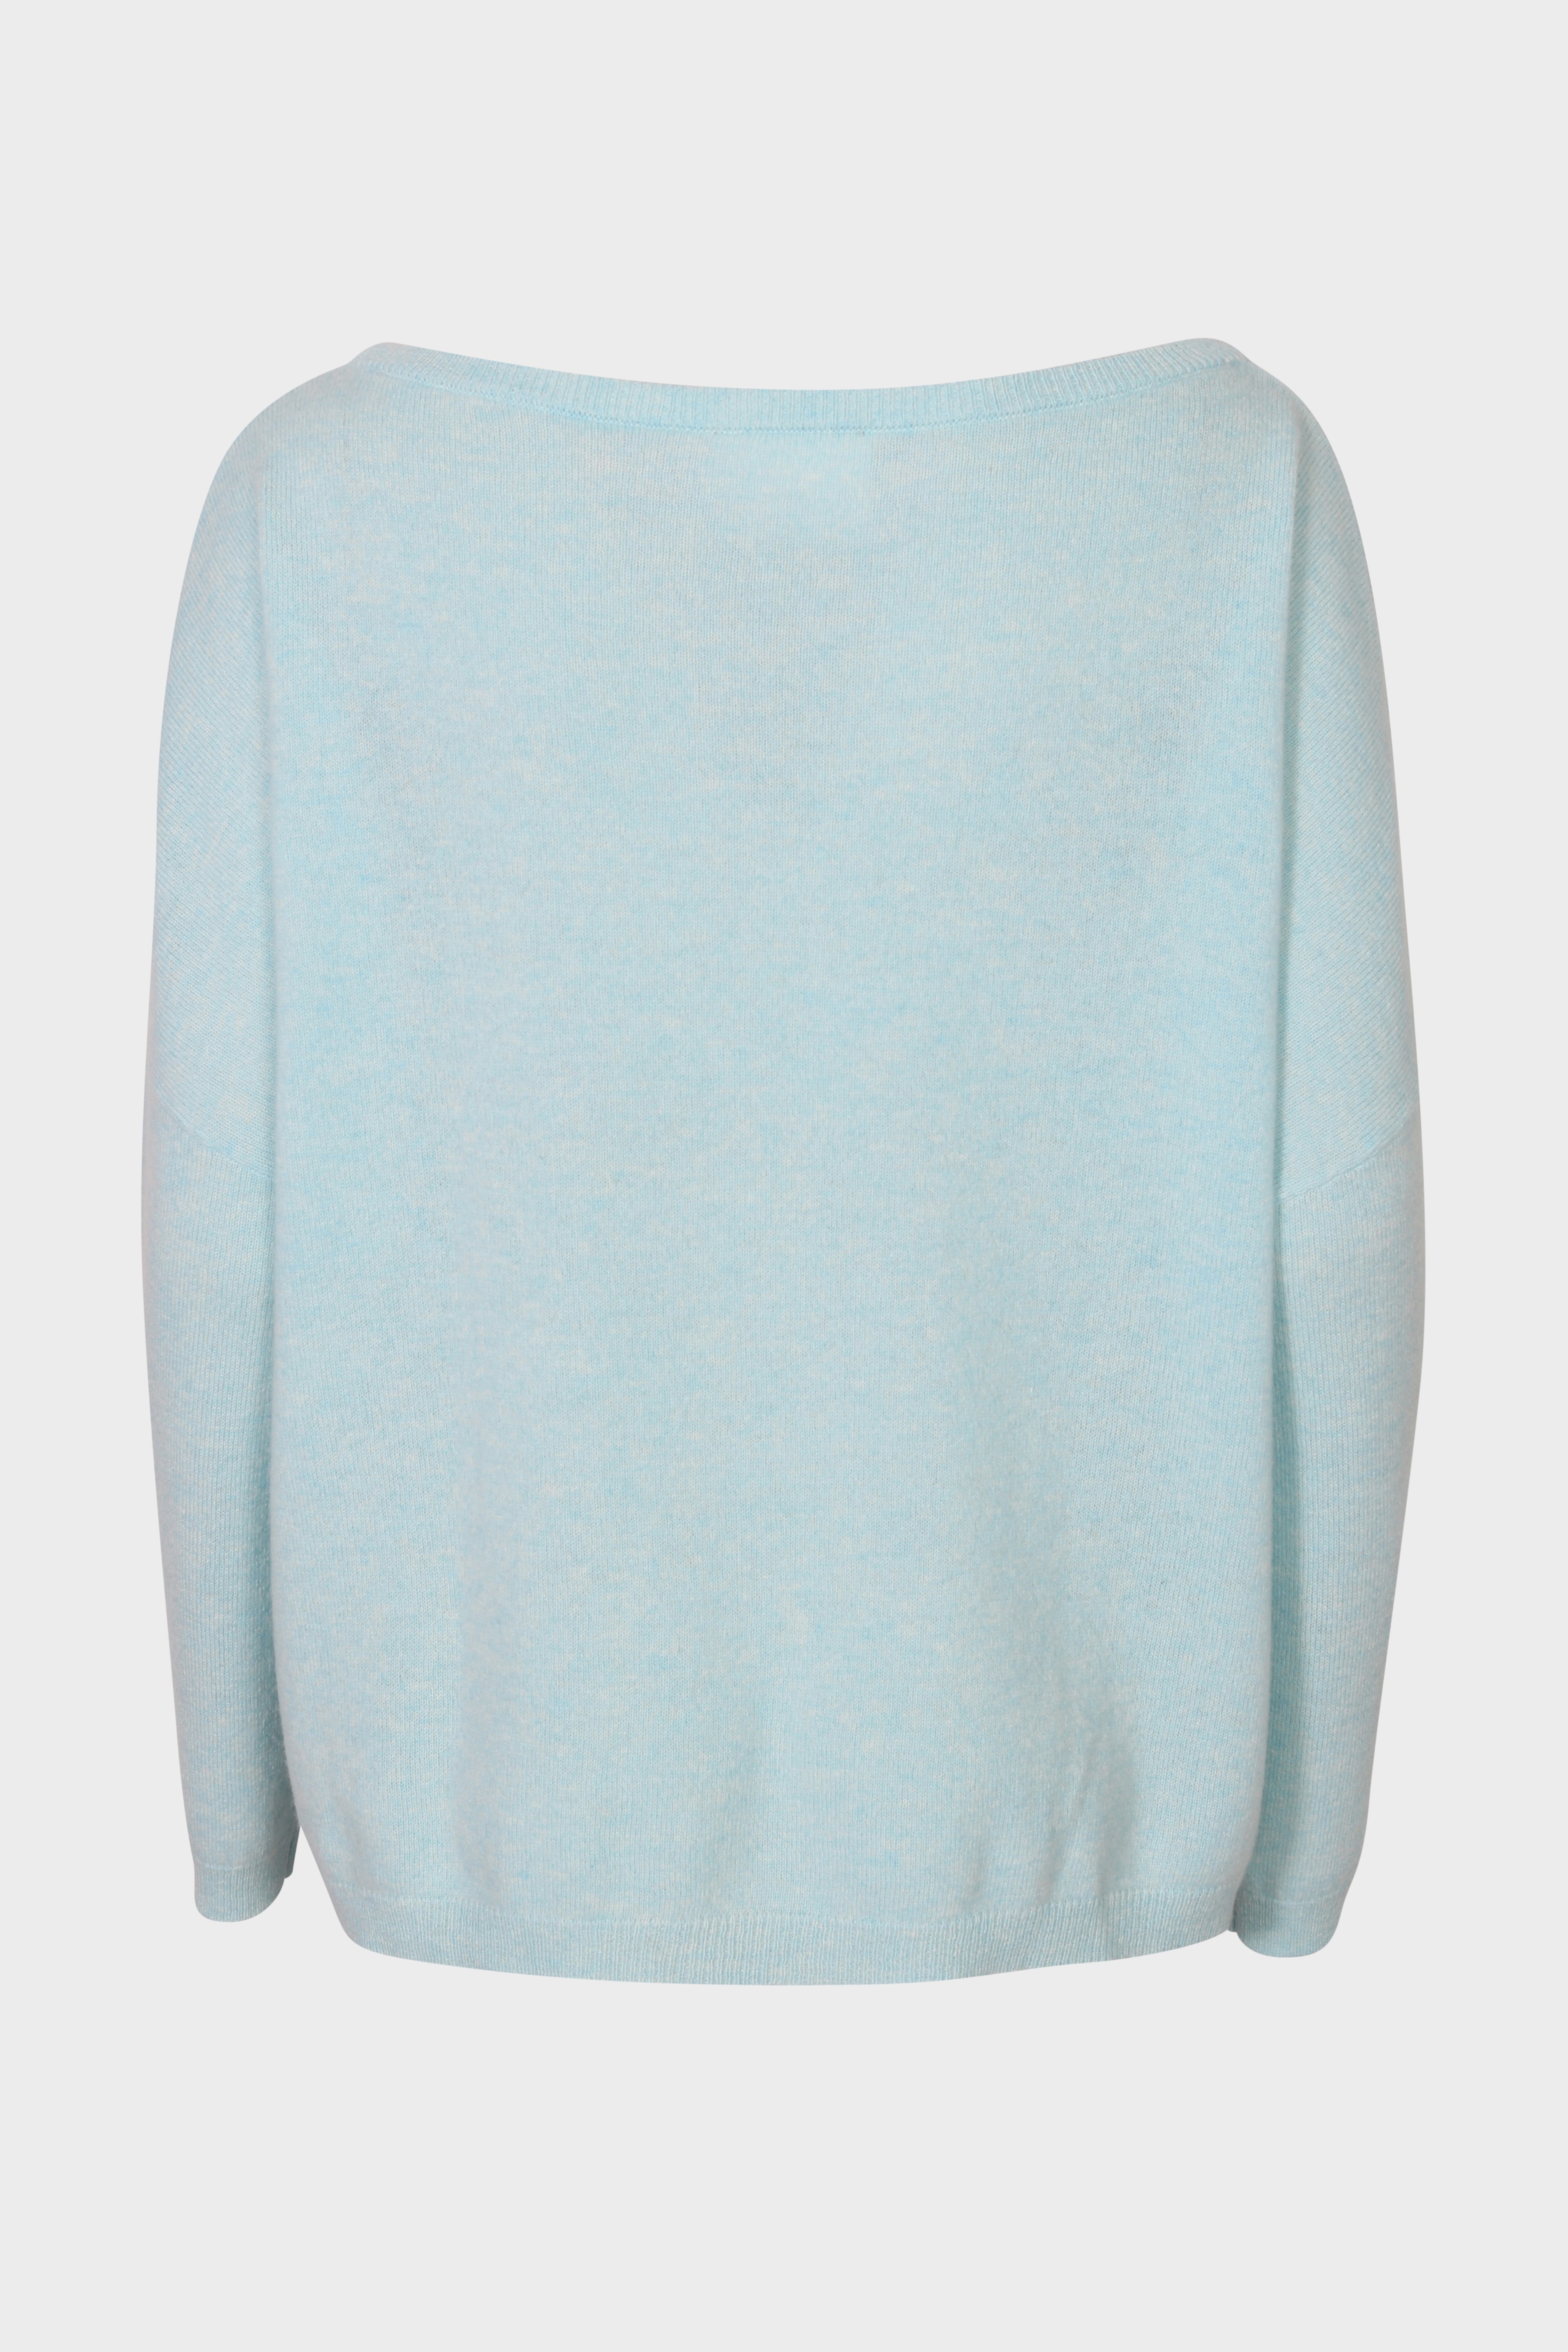 ABSOLUT CASHMERE Poncho Althea Sky S